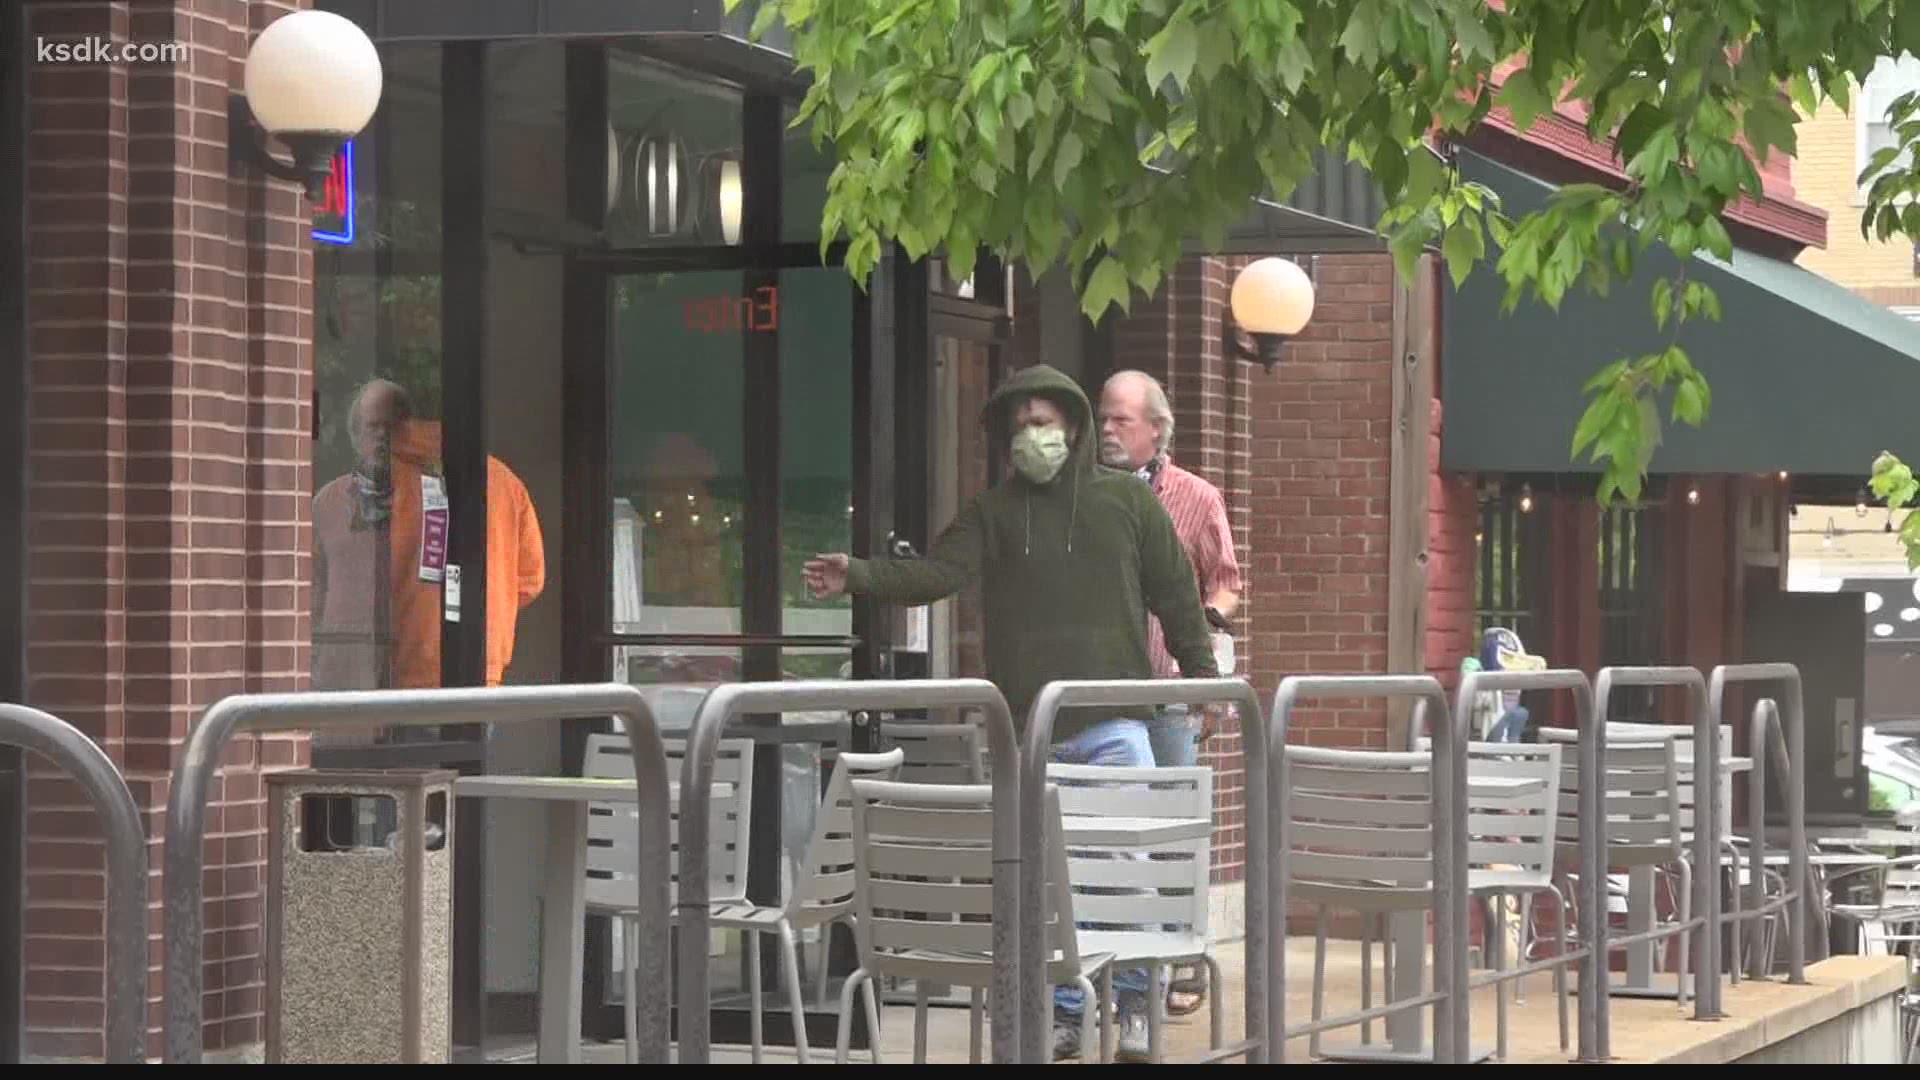 St. Louis County gave businesses permission to turn away customers who were not wearing masks.